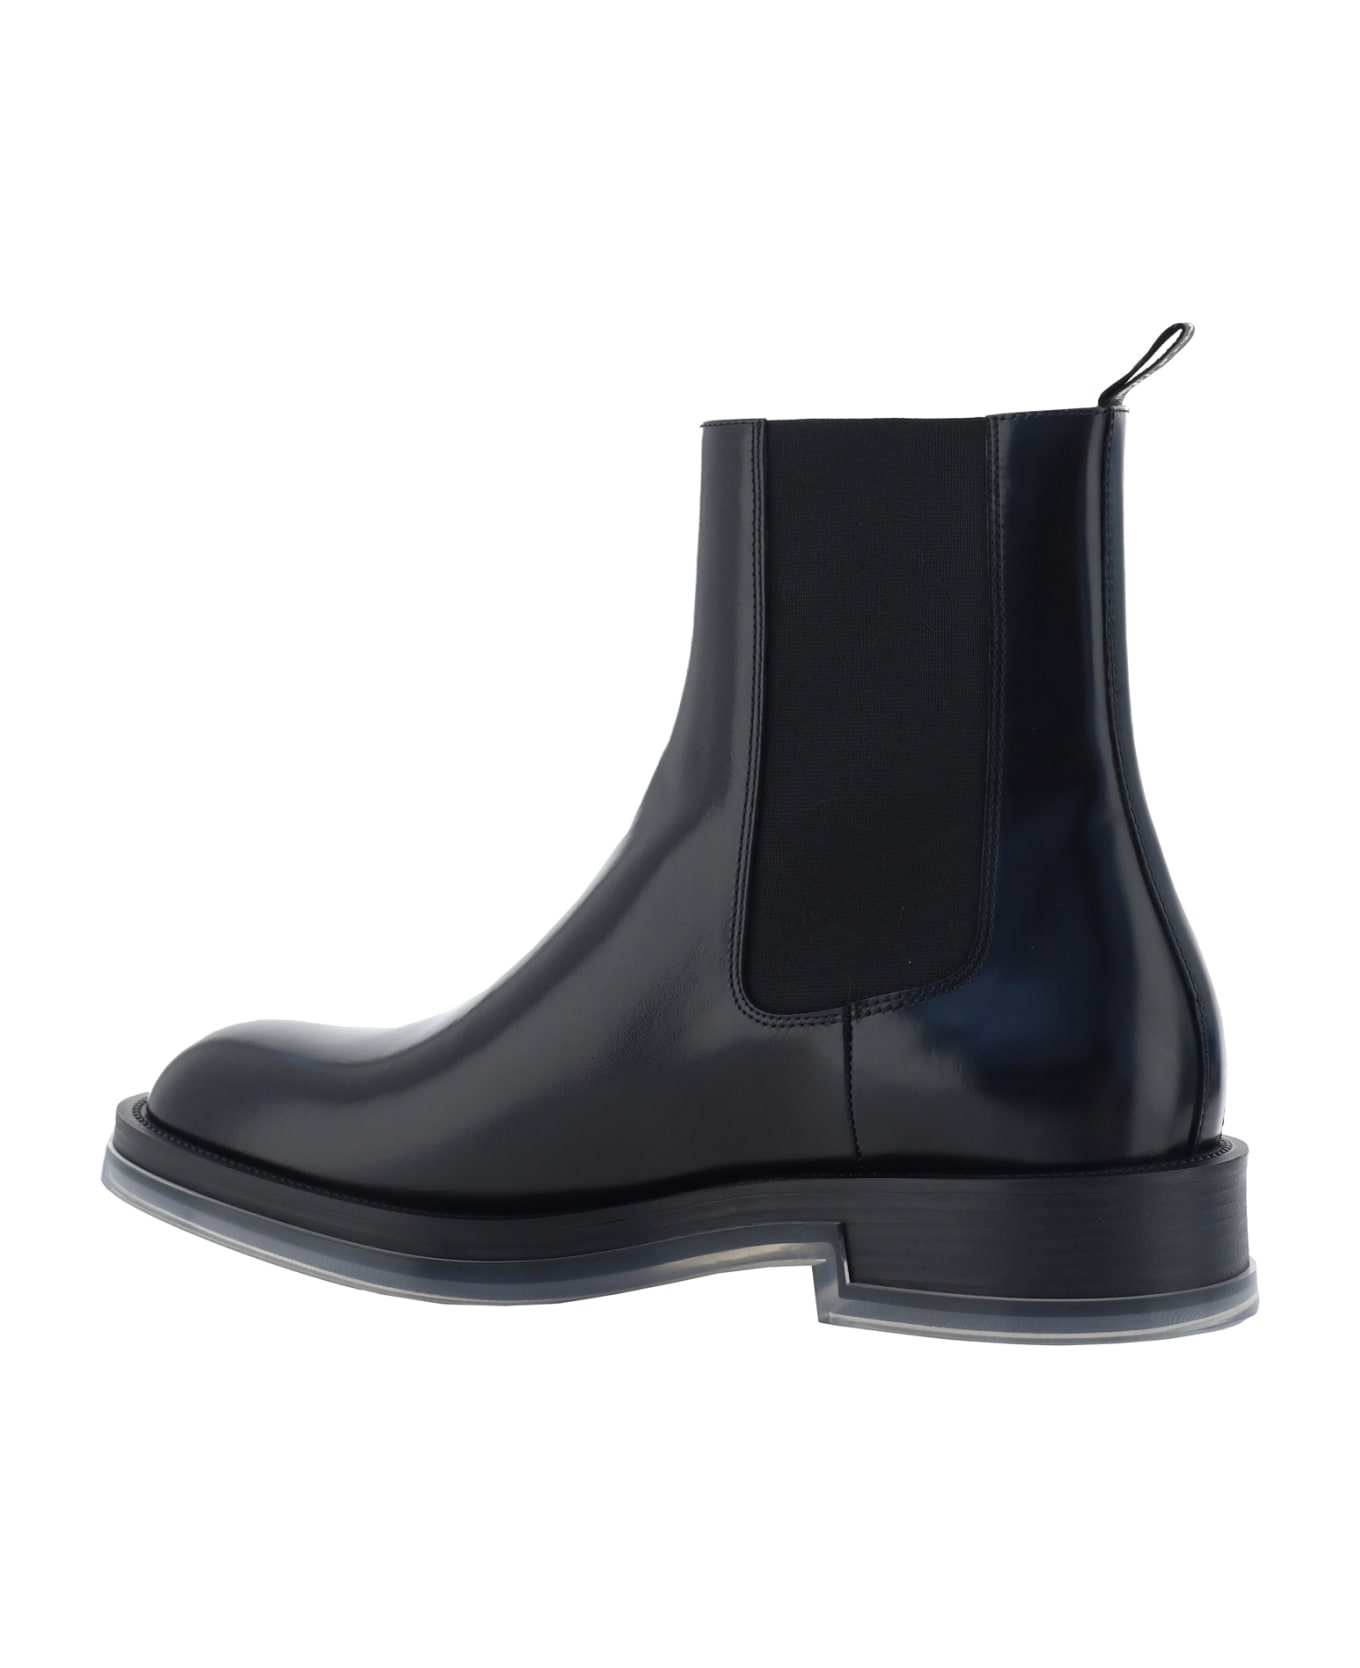 Alexander McQueen Ankle Boots - Black/silver/transpa